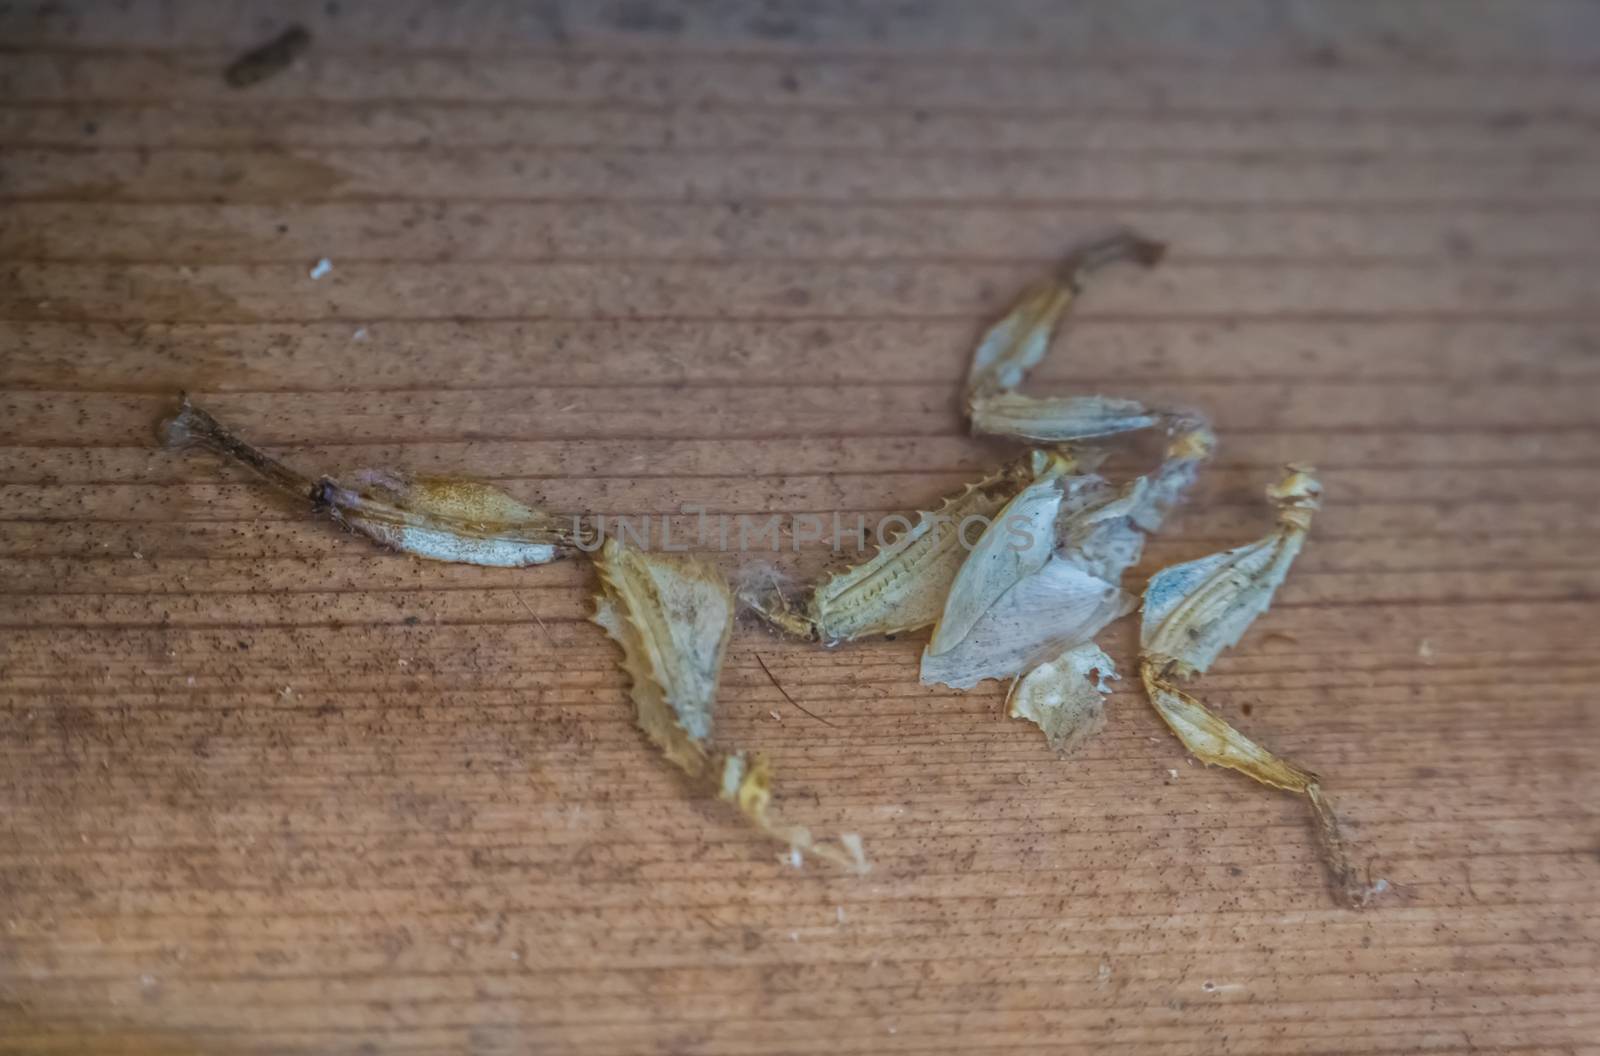 moult of a spiny leaf insect, Bug shedding, tropical walking stick specie from Australia